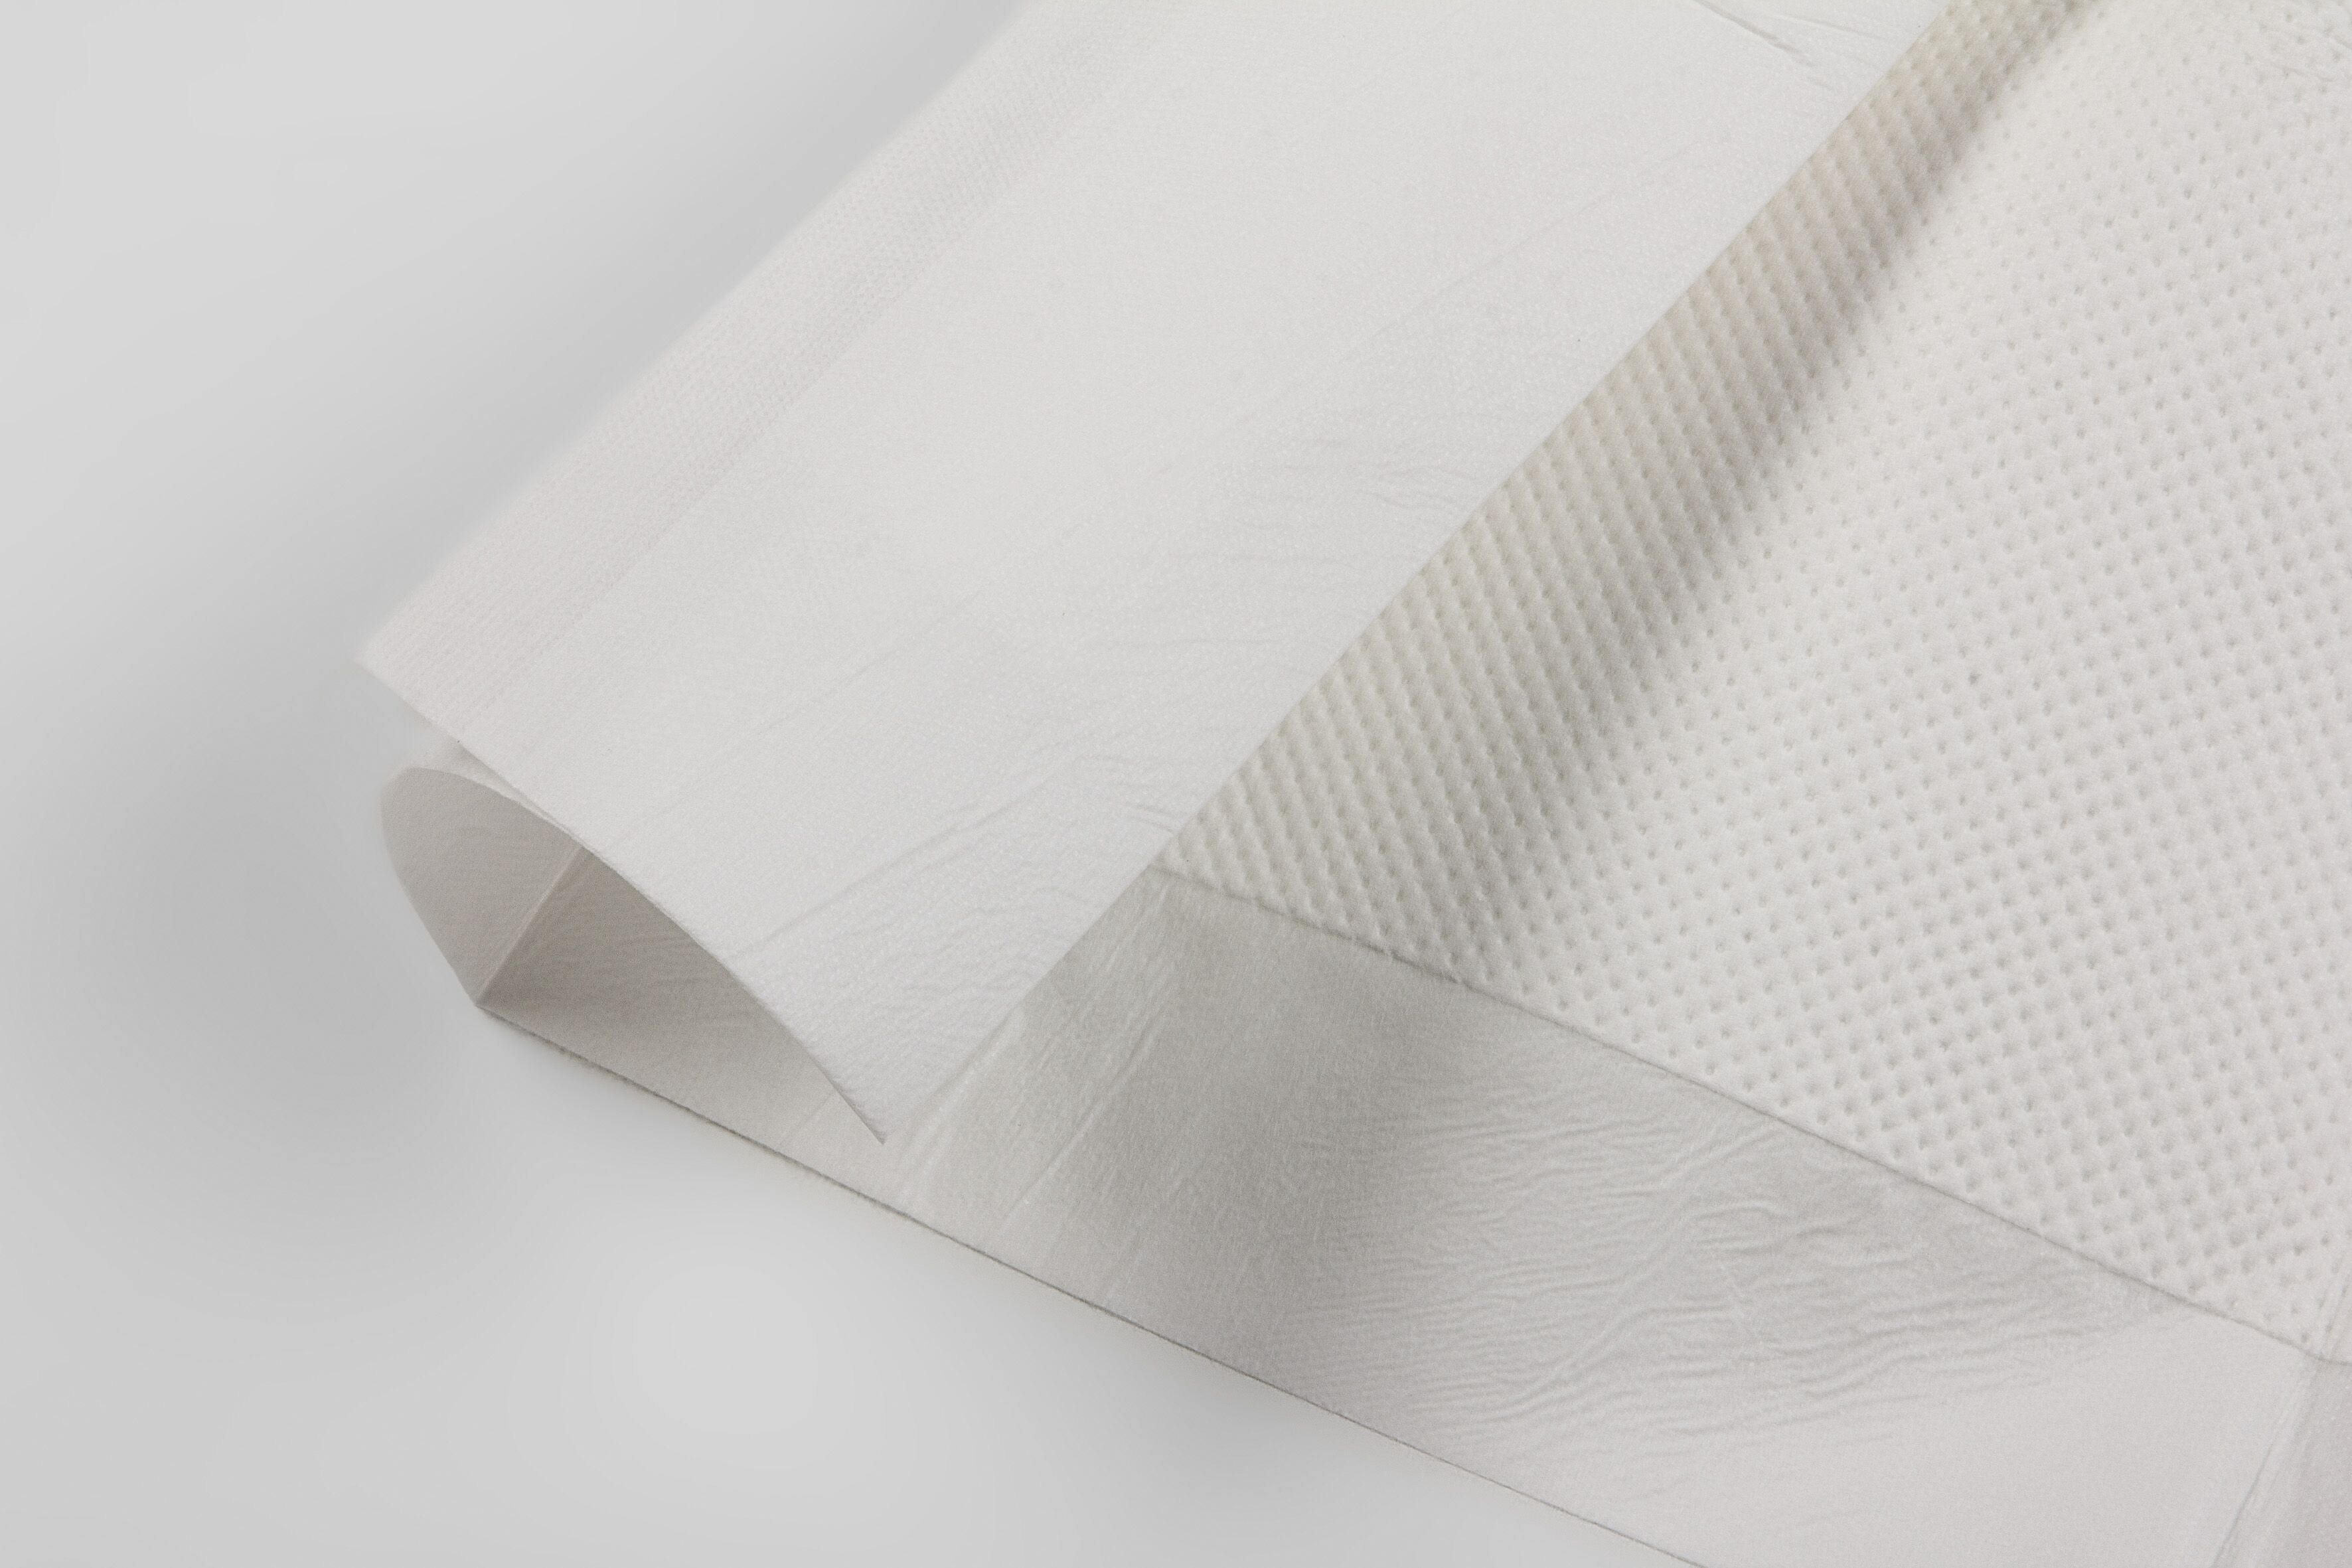 Transfer Sheet, white. Load capacity up to 150 kg, absorbent to 2,5l.
Do not use as Carry Cloth.

PP-nonwoven: 50g/m2 + PE: 25g/m2
Cellulose: 18g/m2 
27g SAP and 92g Fluff Pulp 
18g/m2 Tissue